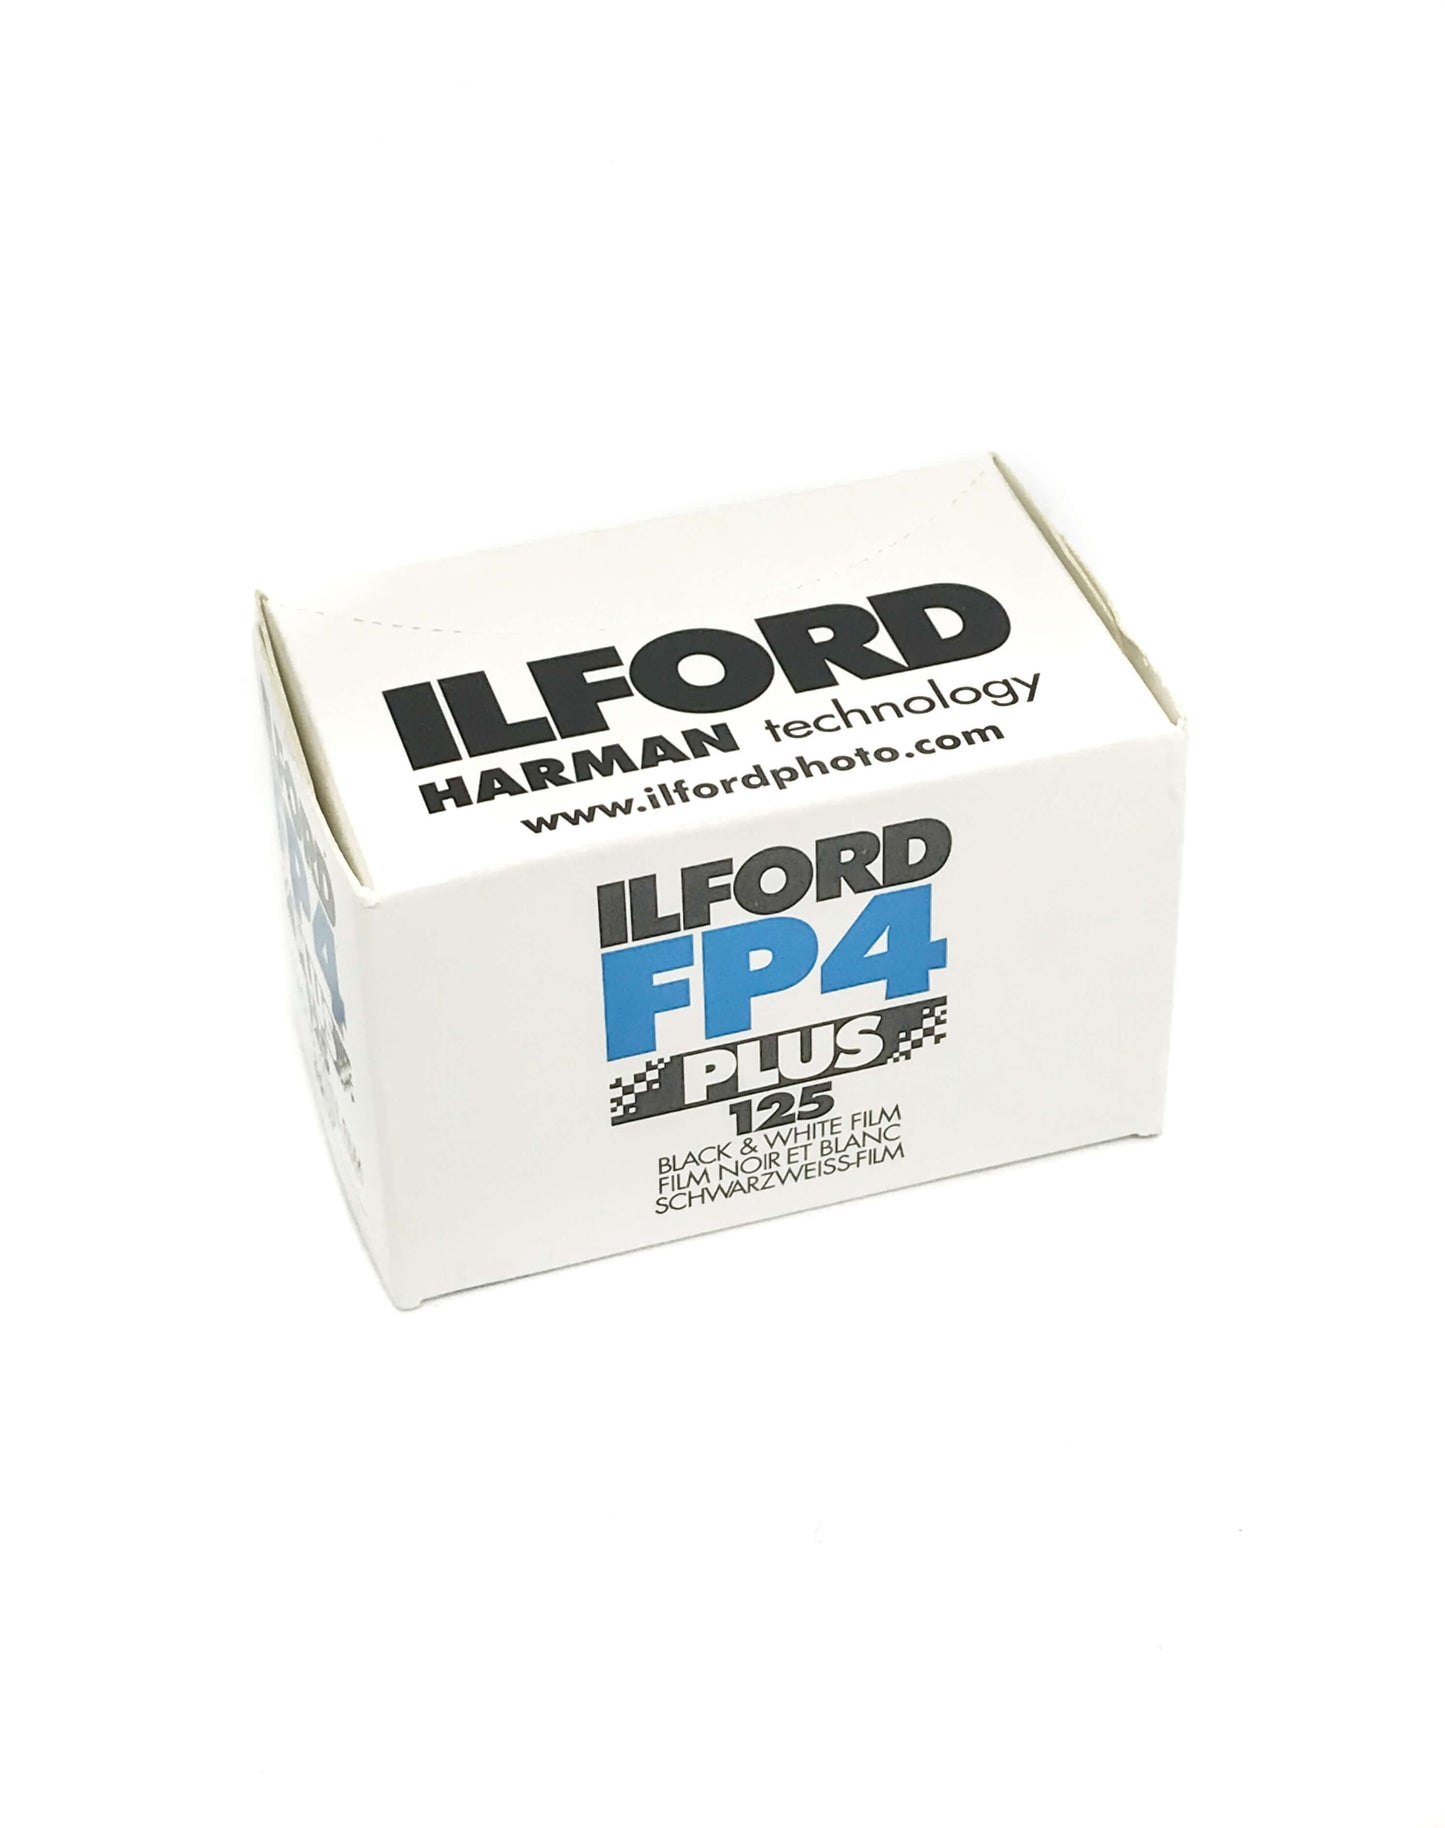 ILFORD FP4 125 Black and White 35mm Film ( 24 Exposures )